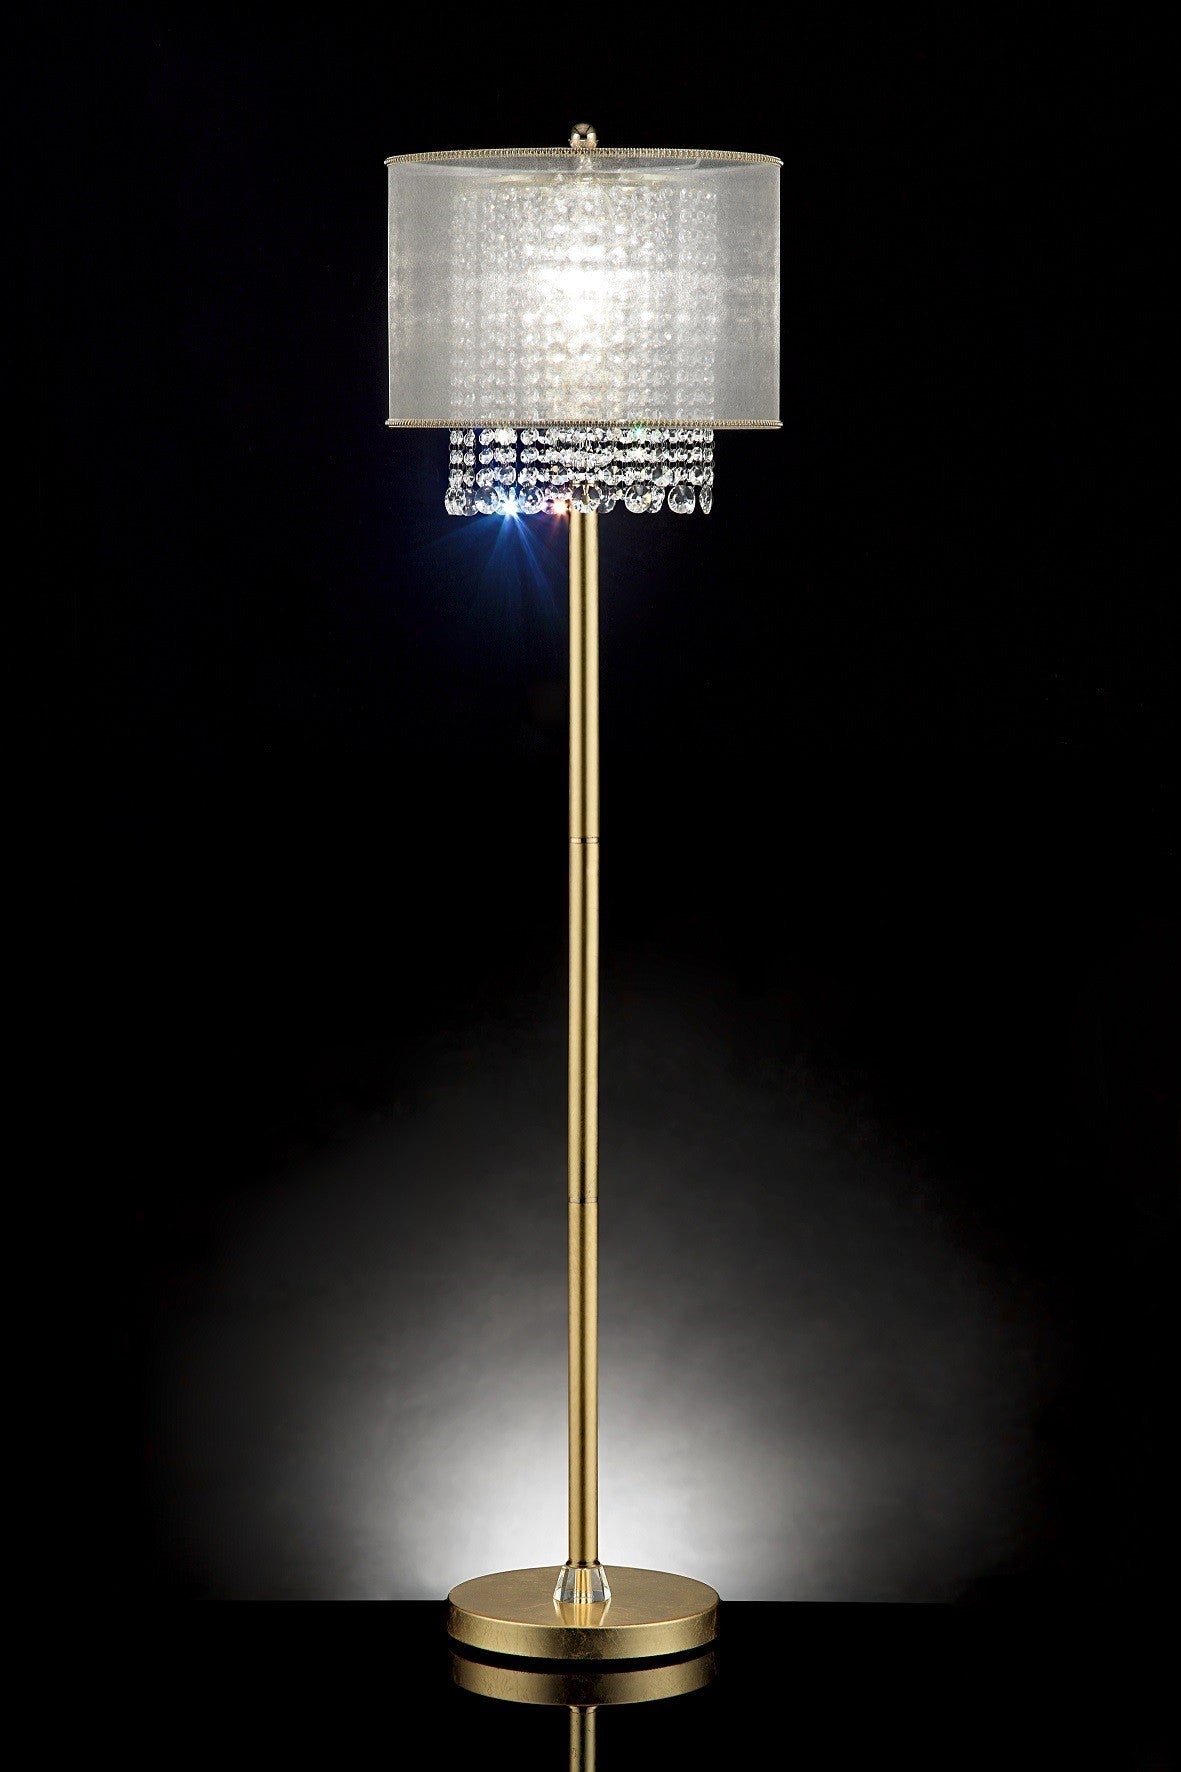 65" Gold Novelty Floor Lamp With White Drum Shade